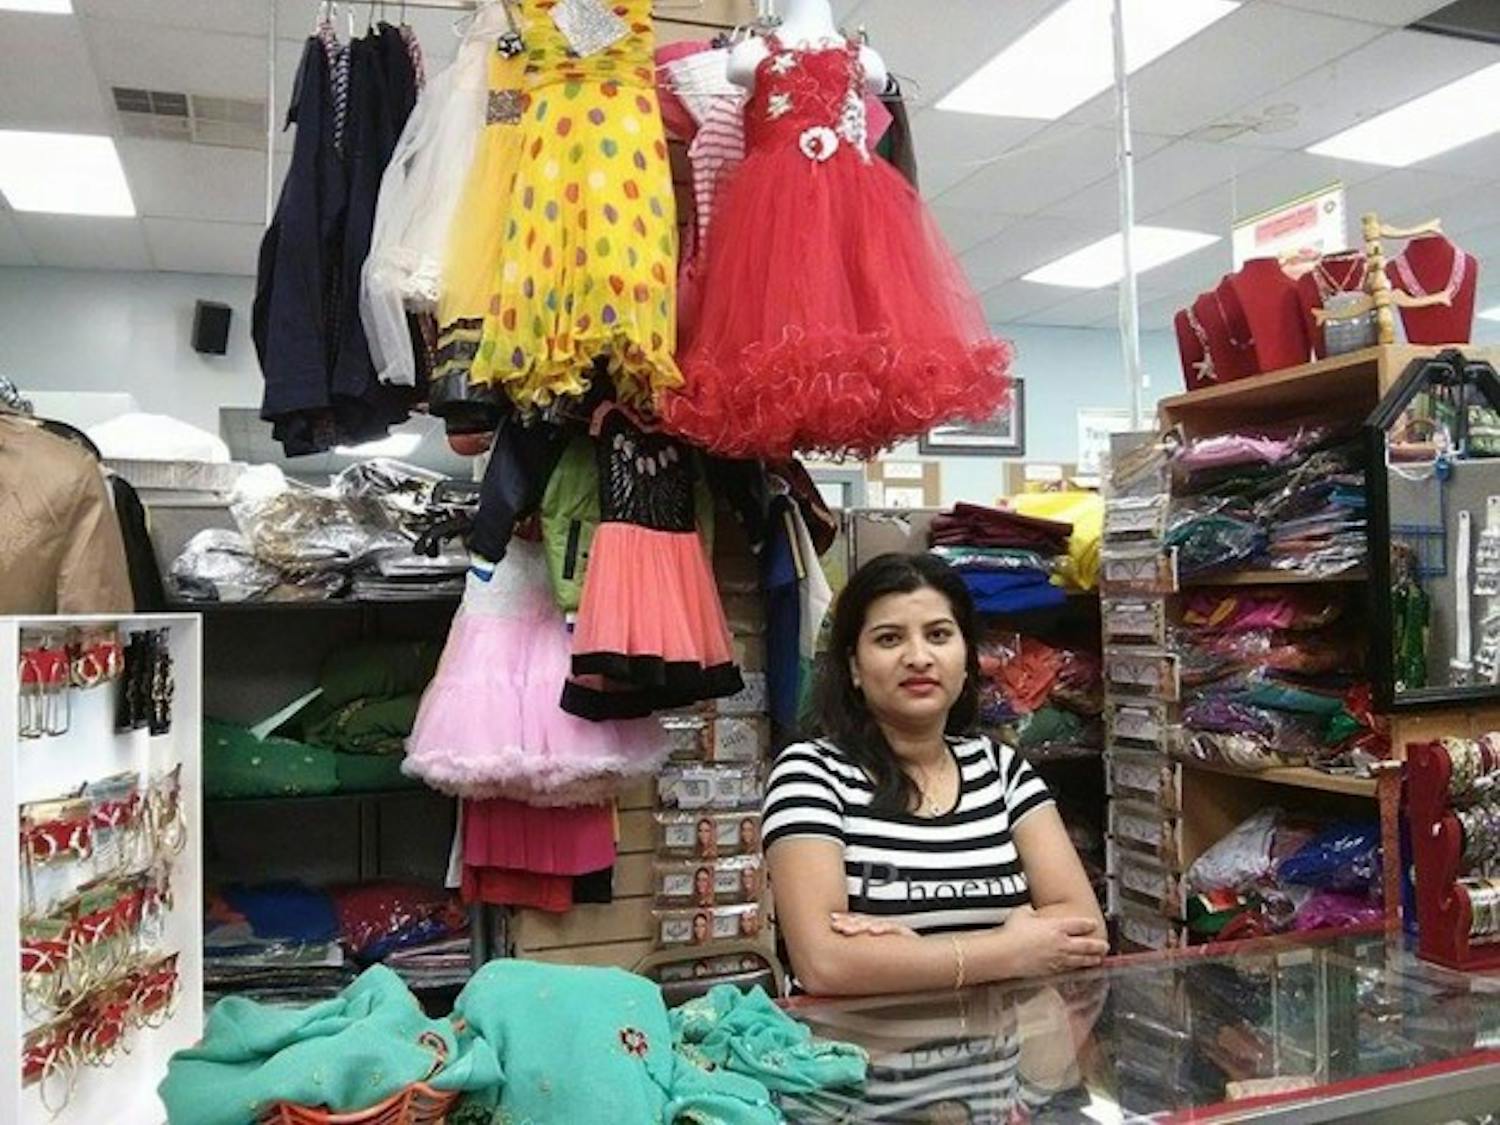 The West Side Bazaar offers refugees and immigrants
the opportunity to connect with their community and
learn entrepreneurial skills. Madhavi Pyakurel (pictured)
works at Nepali Clothing and Cosmetics with her
husband Bhagawat Pyakurel.&nbsp;
Sushmita Gelda, The Spectrum